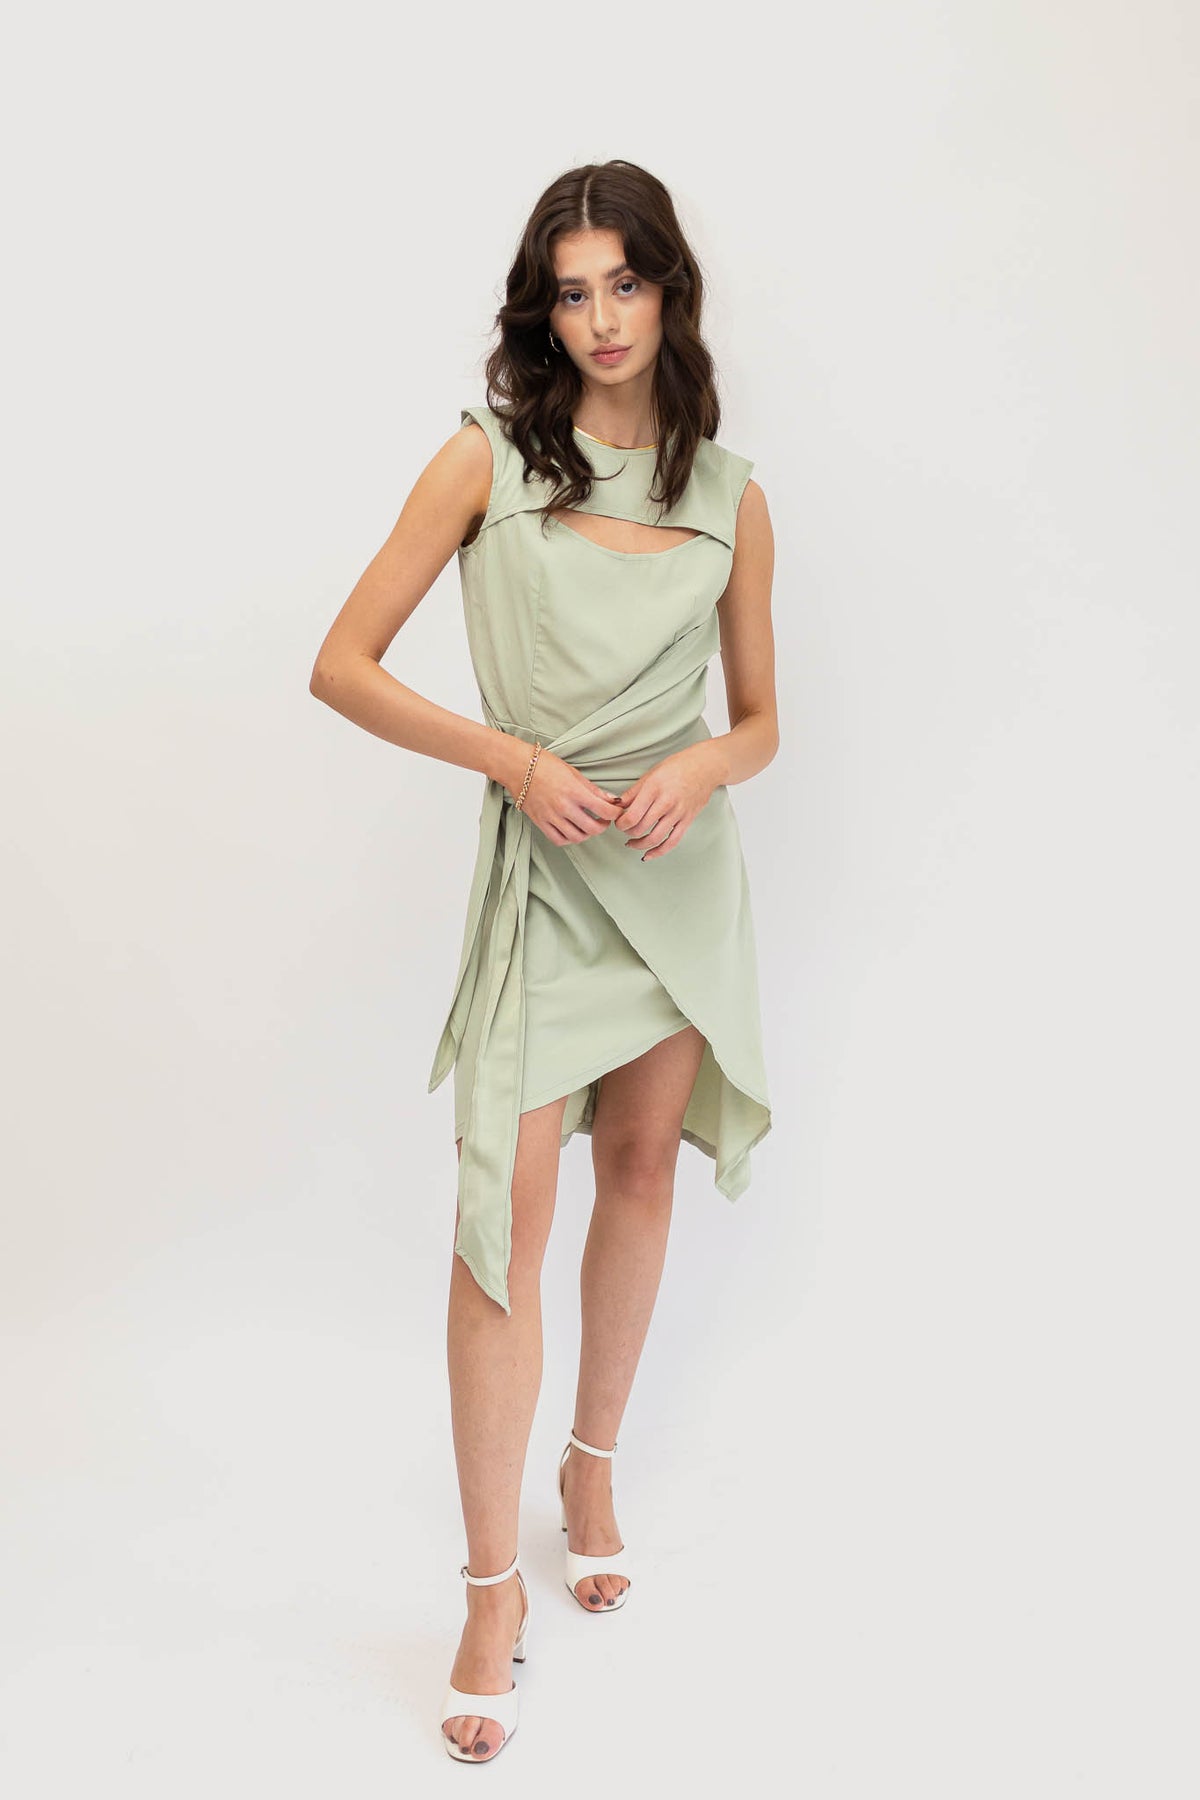 Elegant Asymmetrical Cut-Out Dress in Mint and Nepal Blue